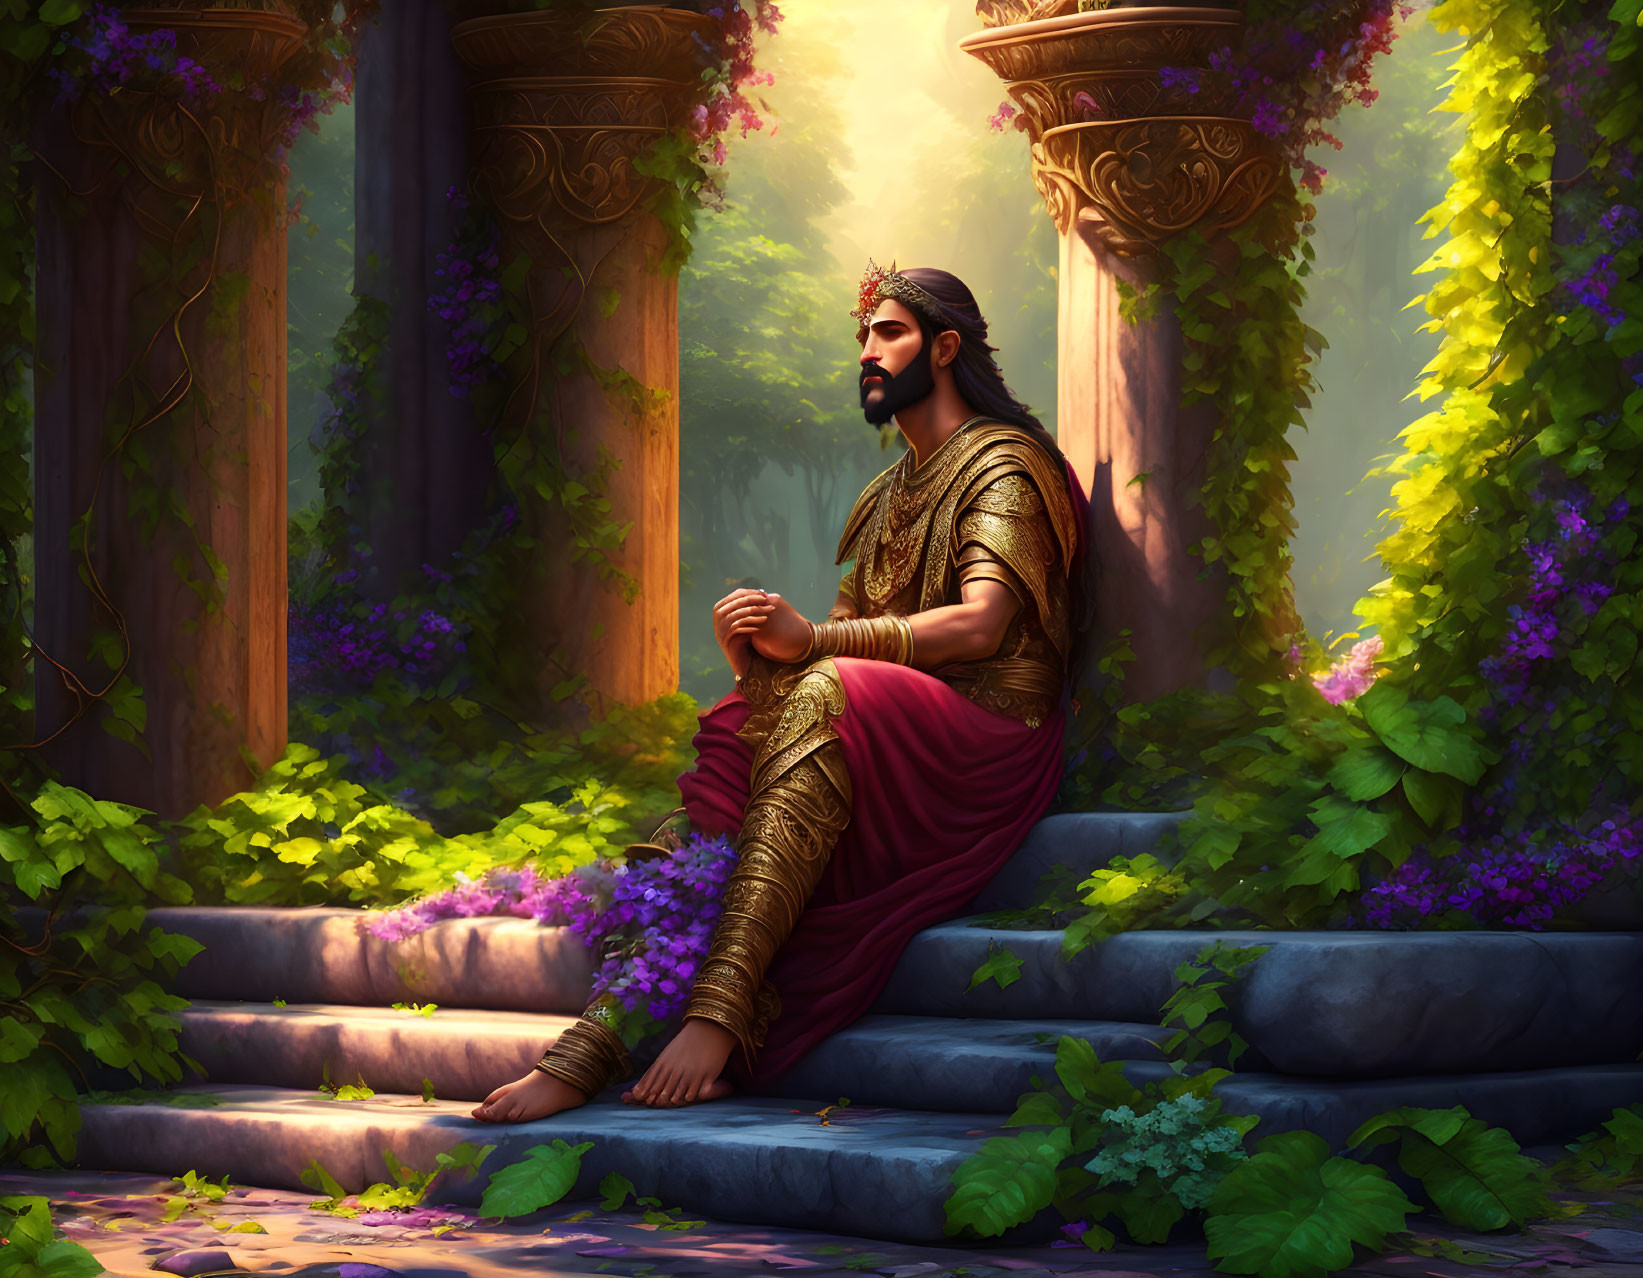 Regal figure in traditional attire on ancient stone steps in lush forest.